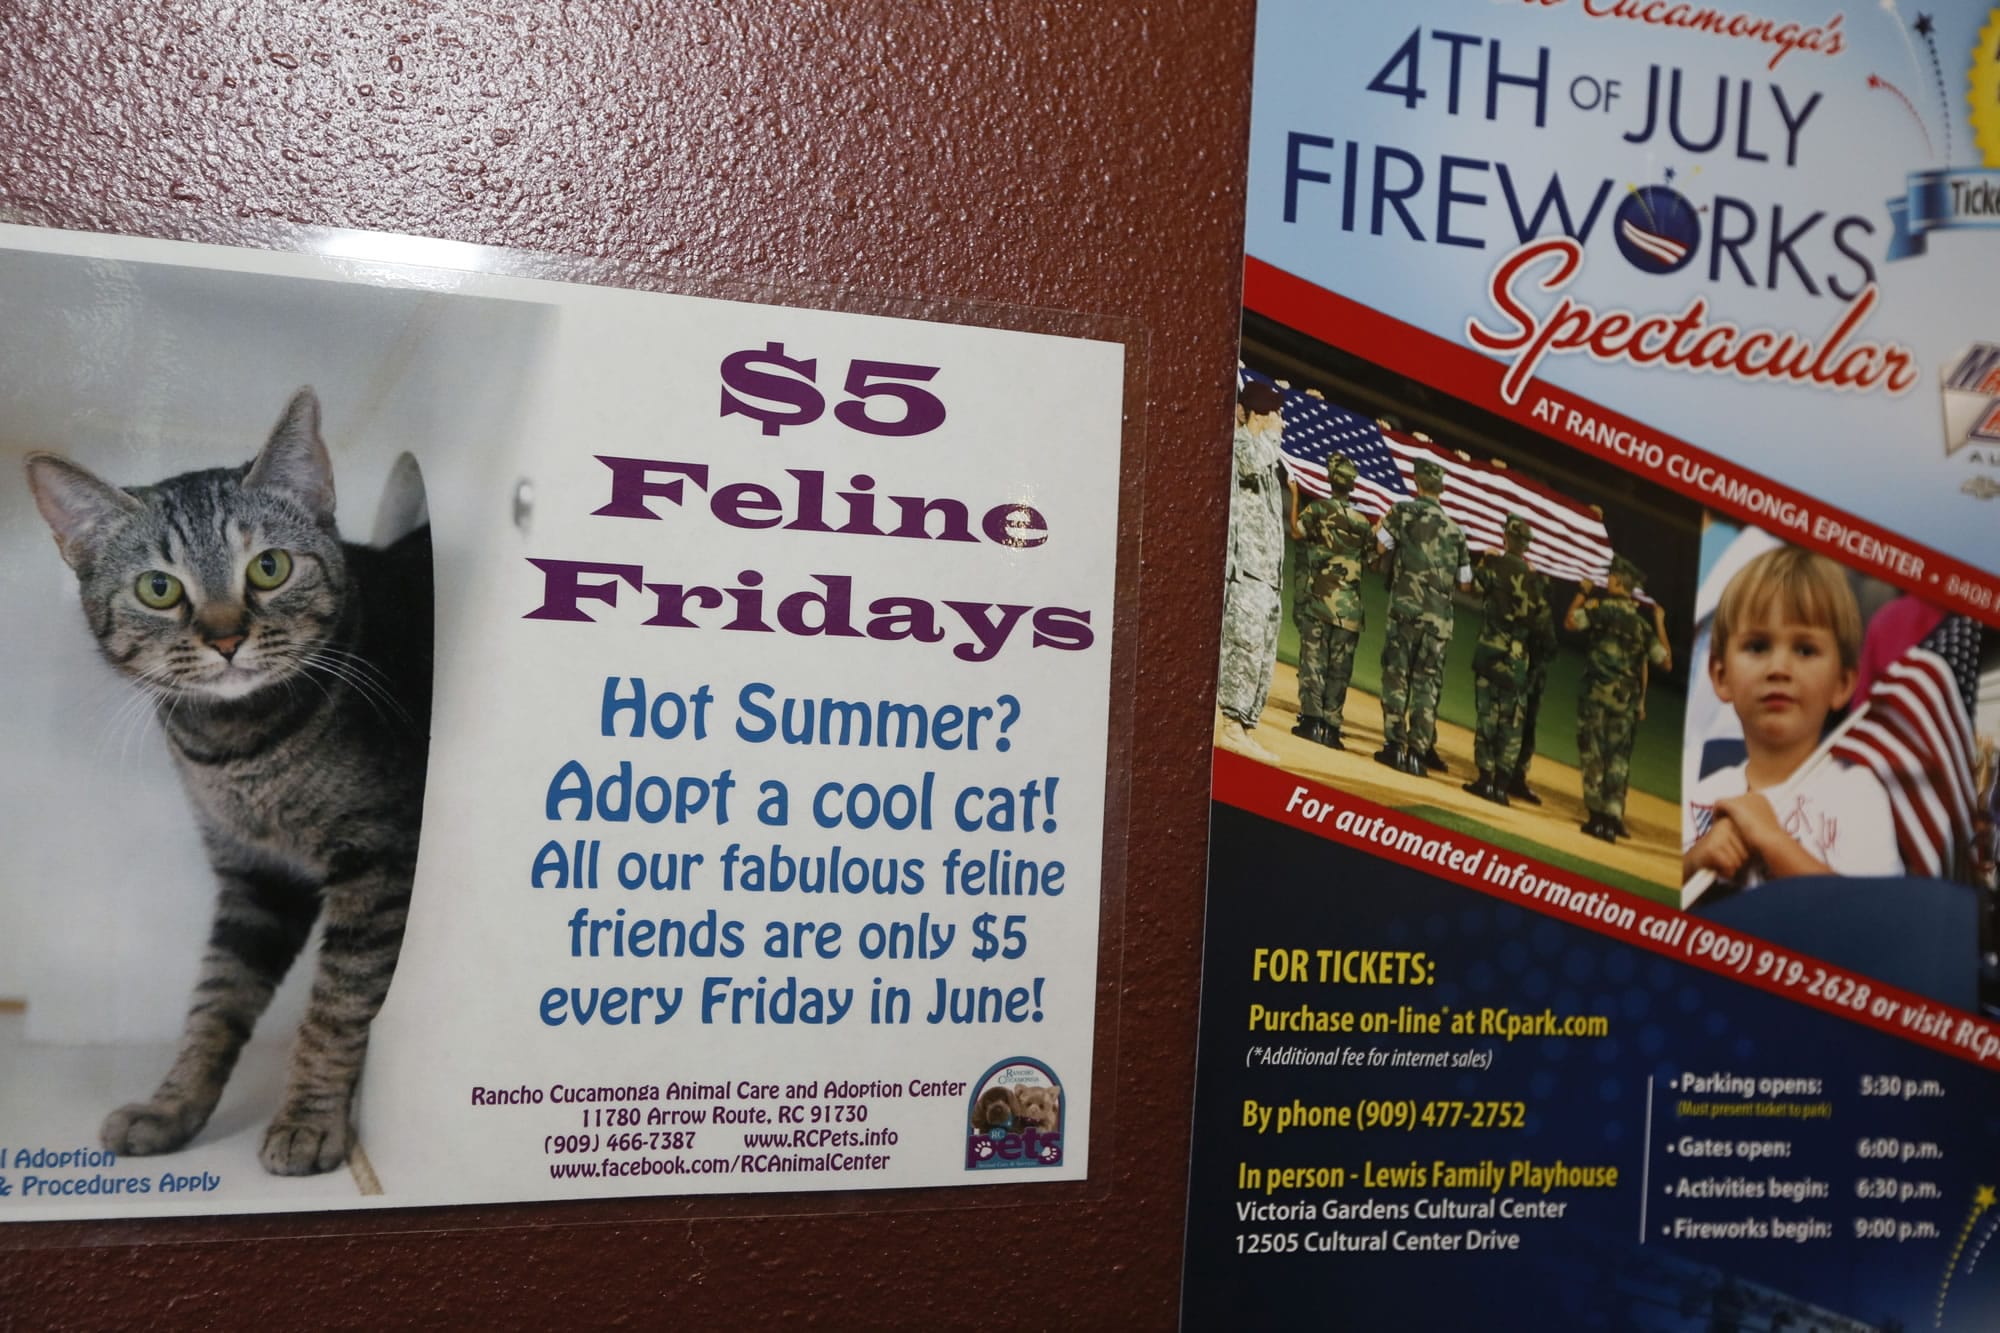 A summer adoption banner is seen next to a 4th of July fireworks events at City of Rancho Cucamonga Animal Care &amp; Adoption Center in Rancho Cucamonga, Calif.